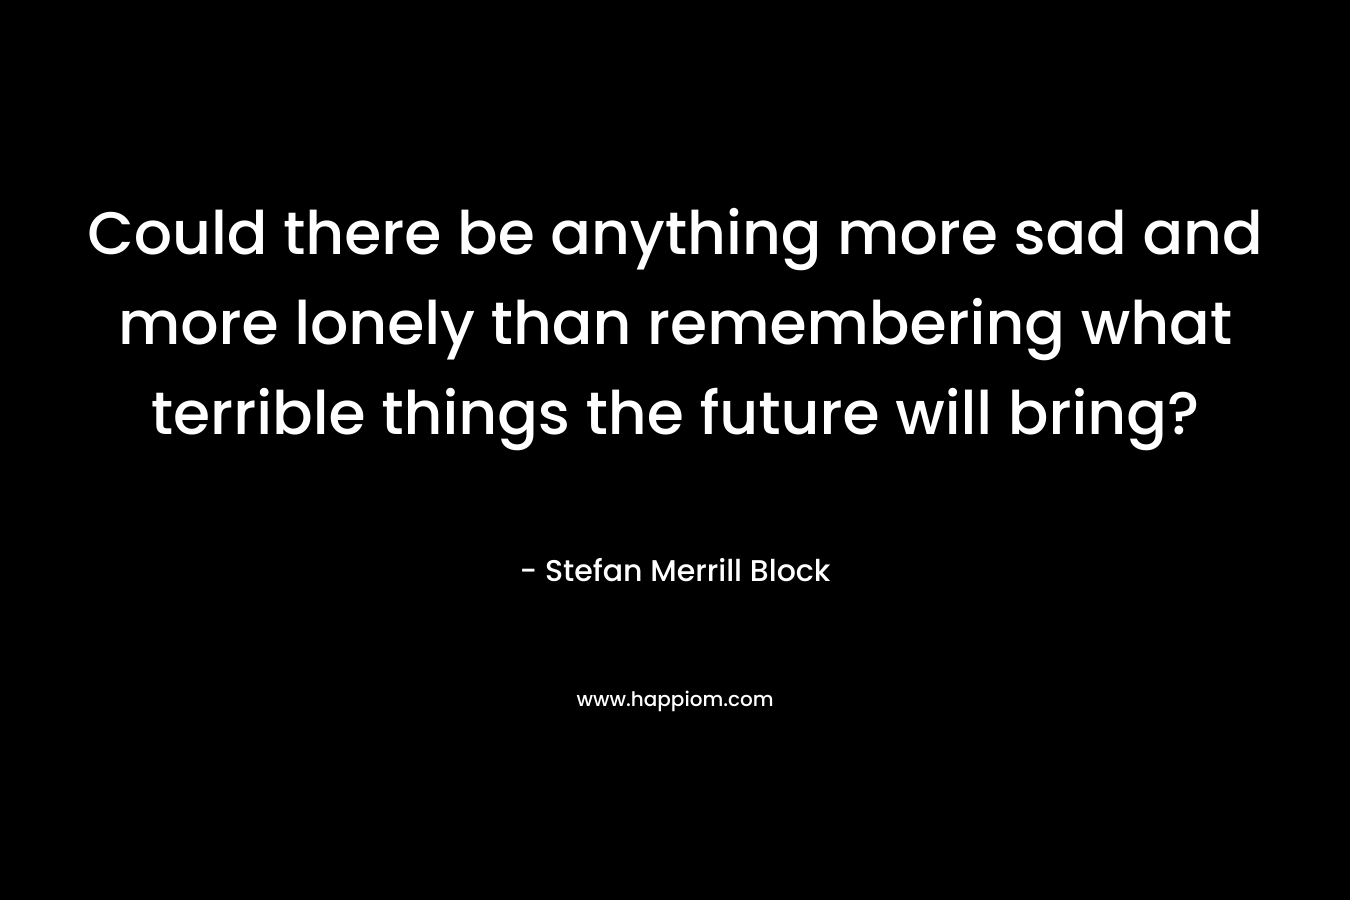 Could there be anything more sad and more lonely than remembering what terrible things the future will bring?